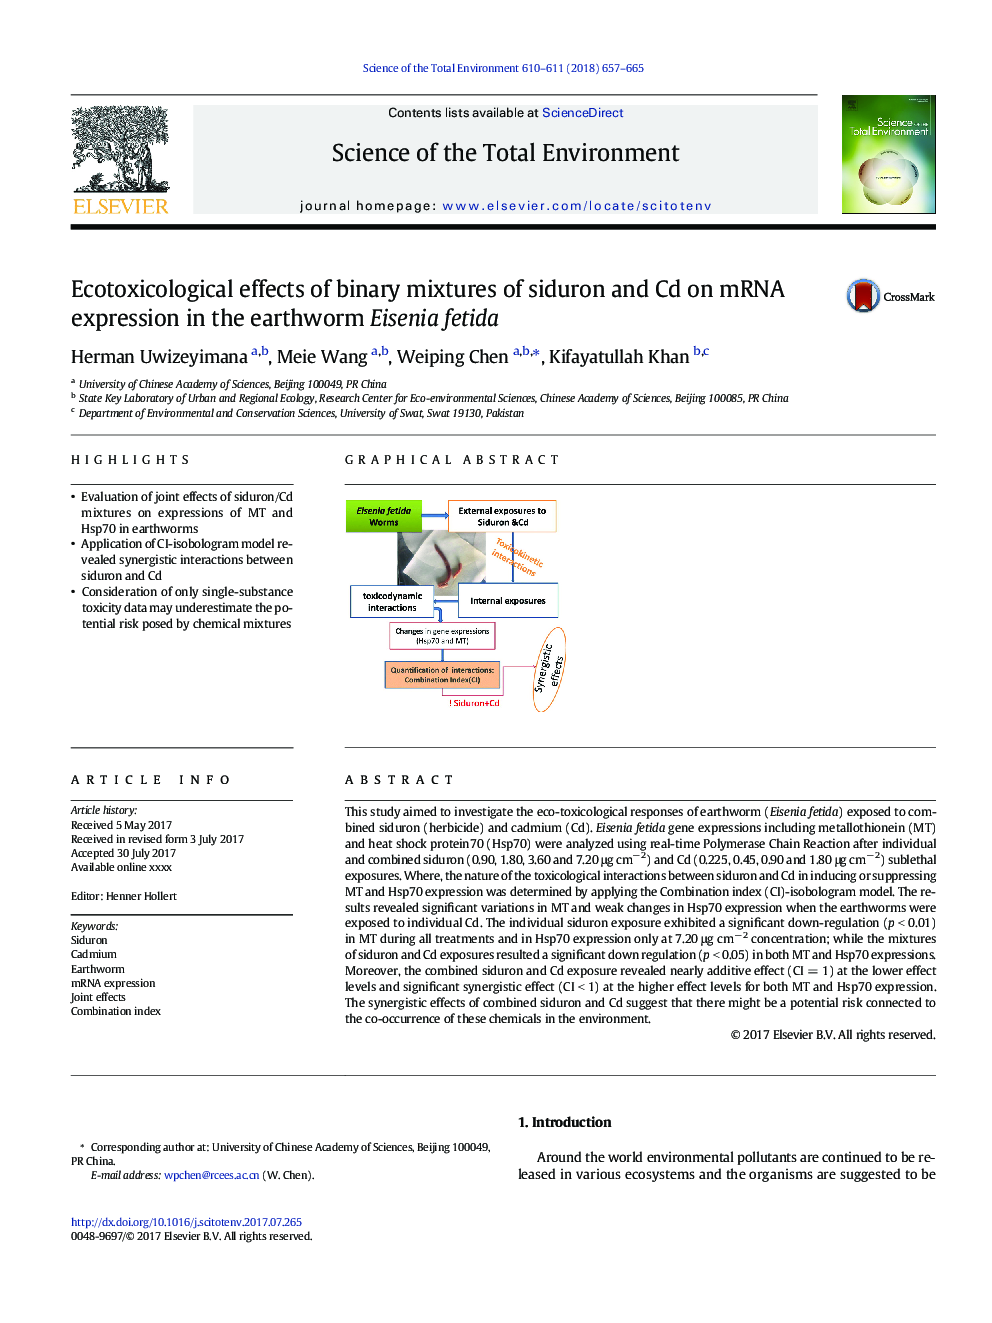 Ecotoxicological effects of binary mixtures of siduron and Cd on mRNA expression in the earthworm Eisenia fetida